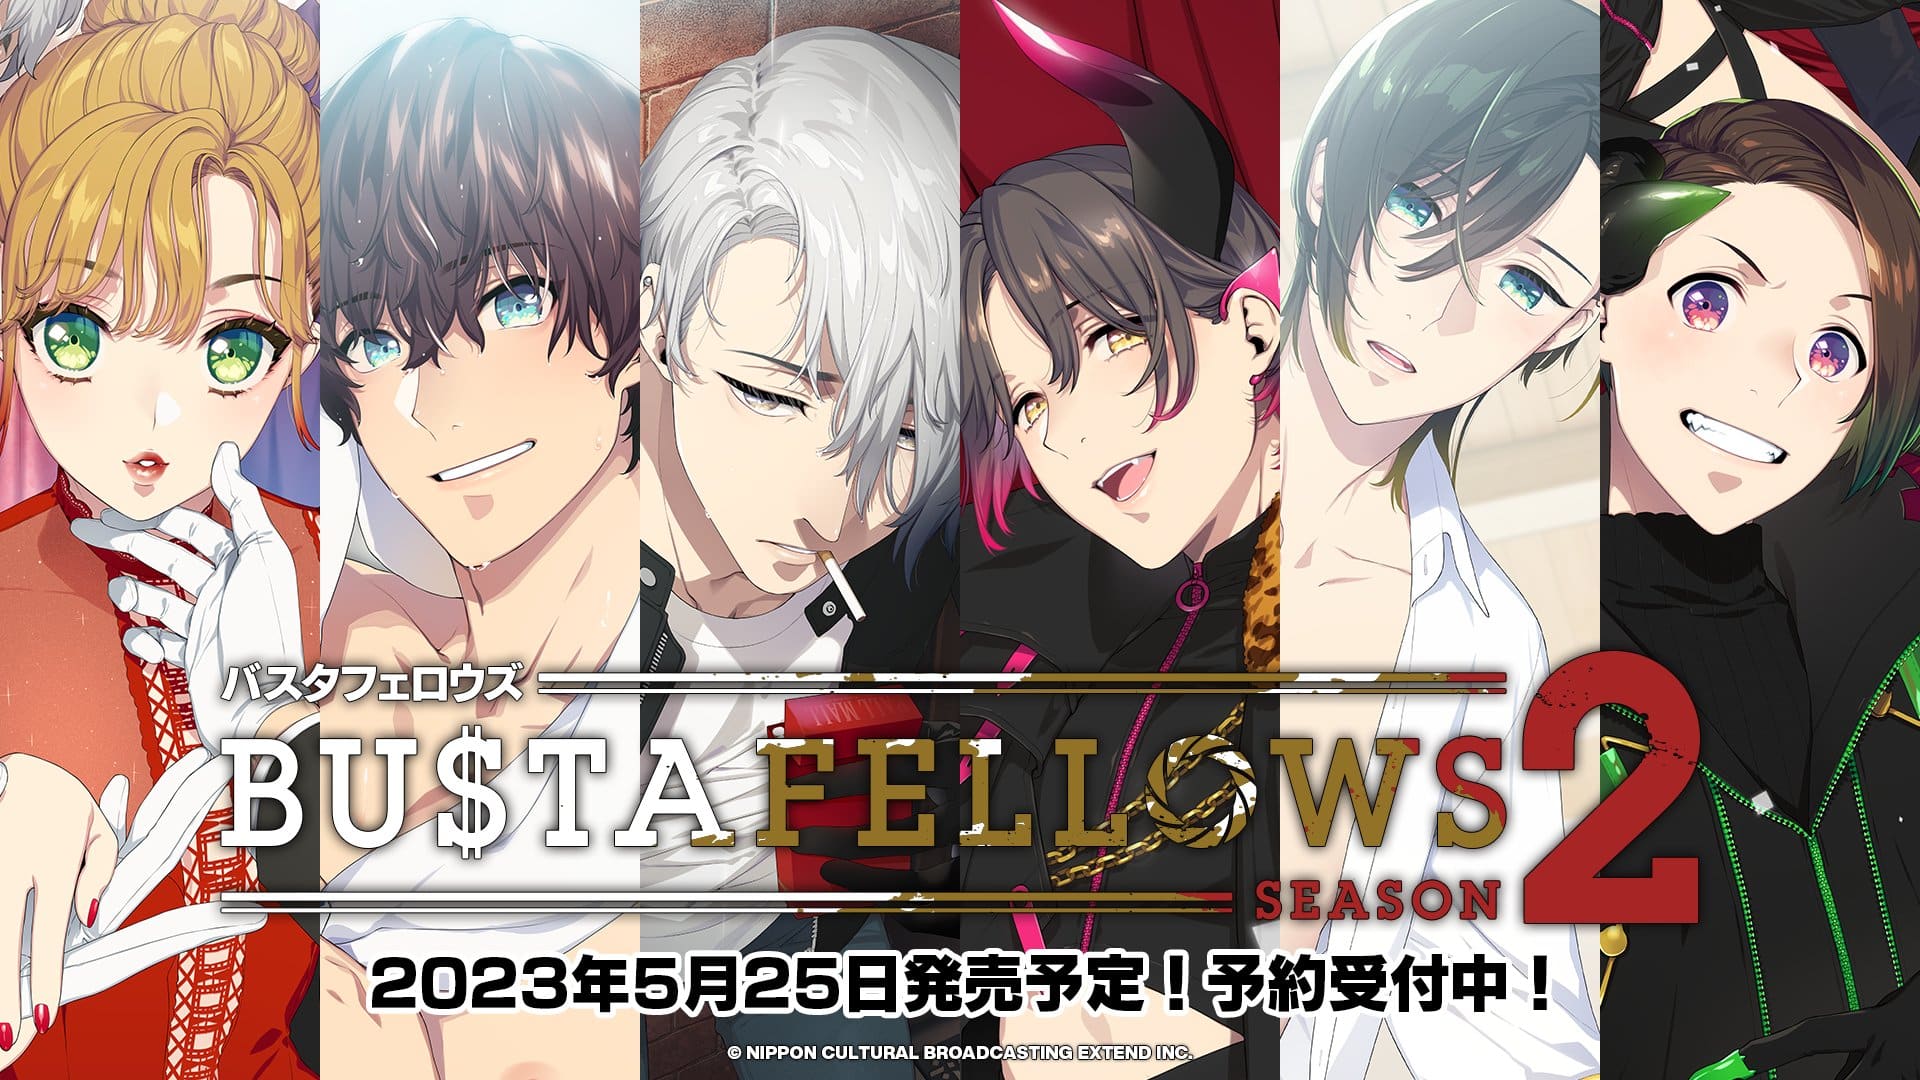 Bustafellows Season 2 Releasing in Japan Late May 2023; Pre-Orders Available